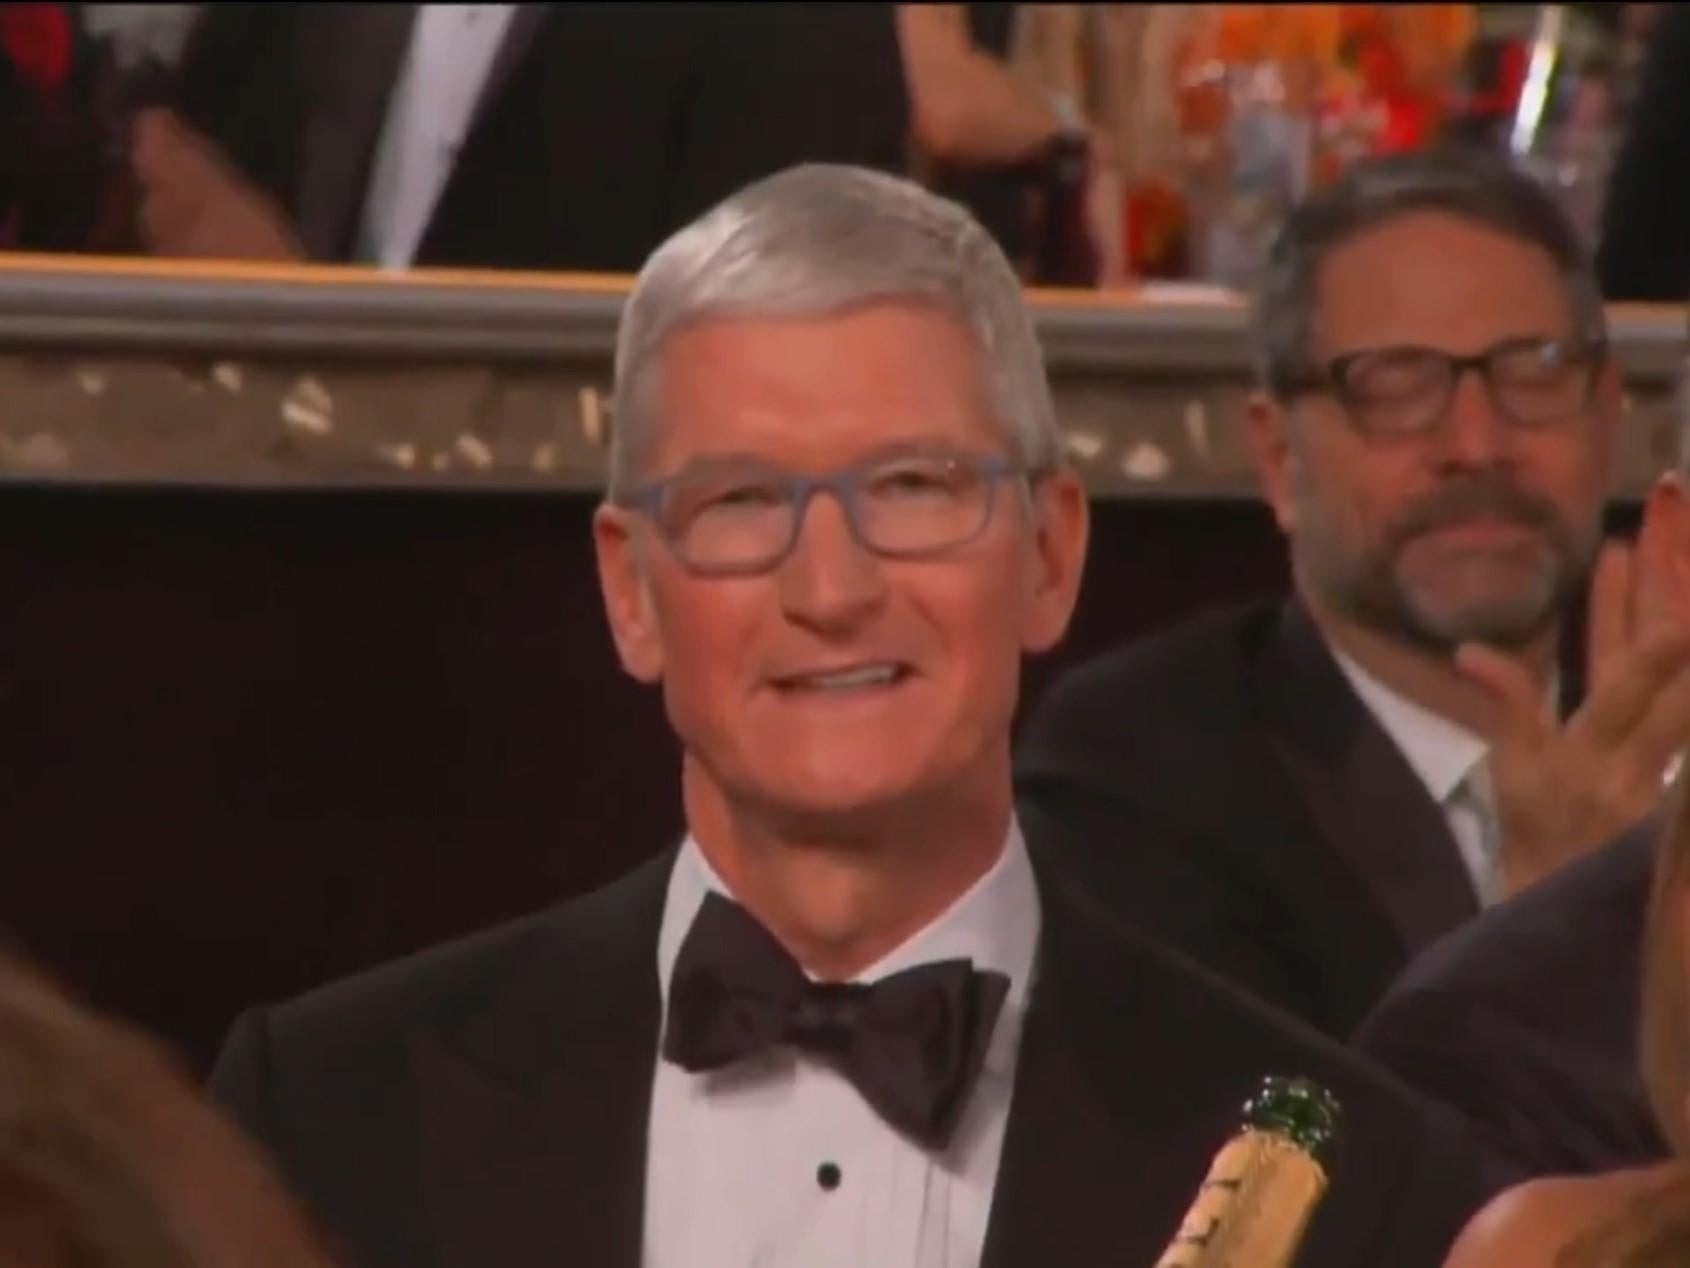 Golden Globes: Ricky Gervais compares Apple to Isis in front of Tim Cook